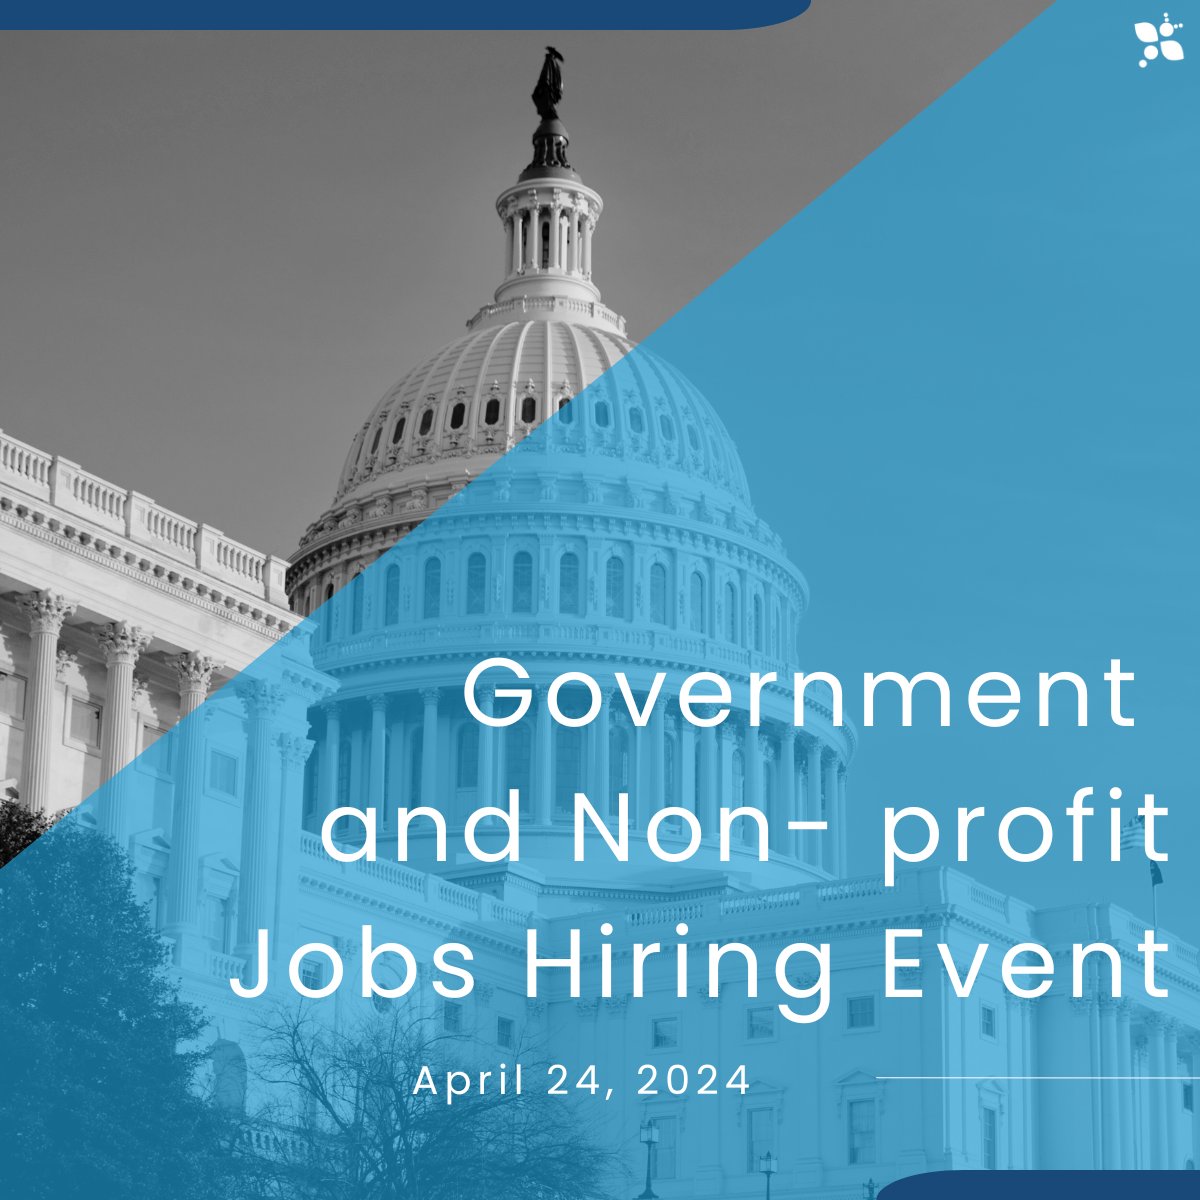 Are you interested in working for the government or a non-profit? Register for the 4/24 Government & Nonprofit Jobs Hiring Event to meet with recruiters from agencies actively hiring. To learn more:bit.ly/4abvUB1 #governmentjobs #nonprofitjobs #hiring #jobs #careereco